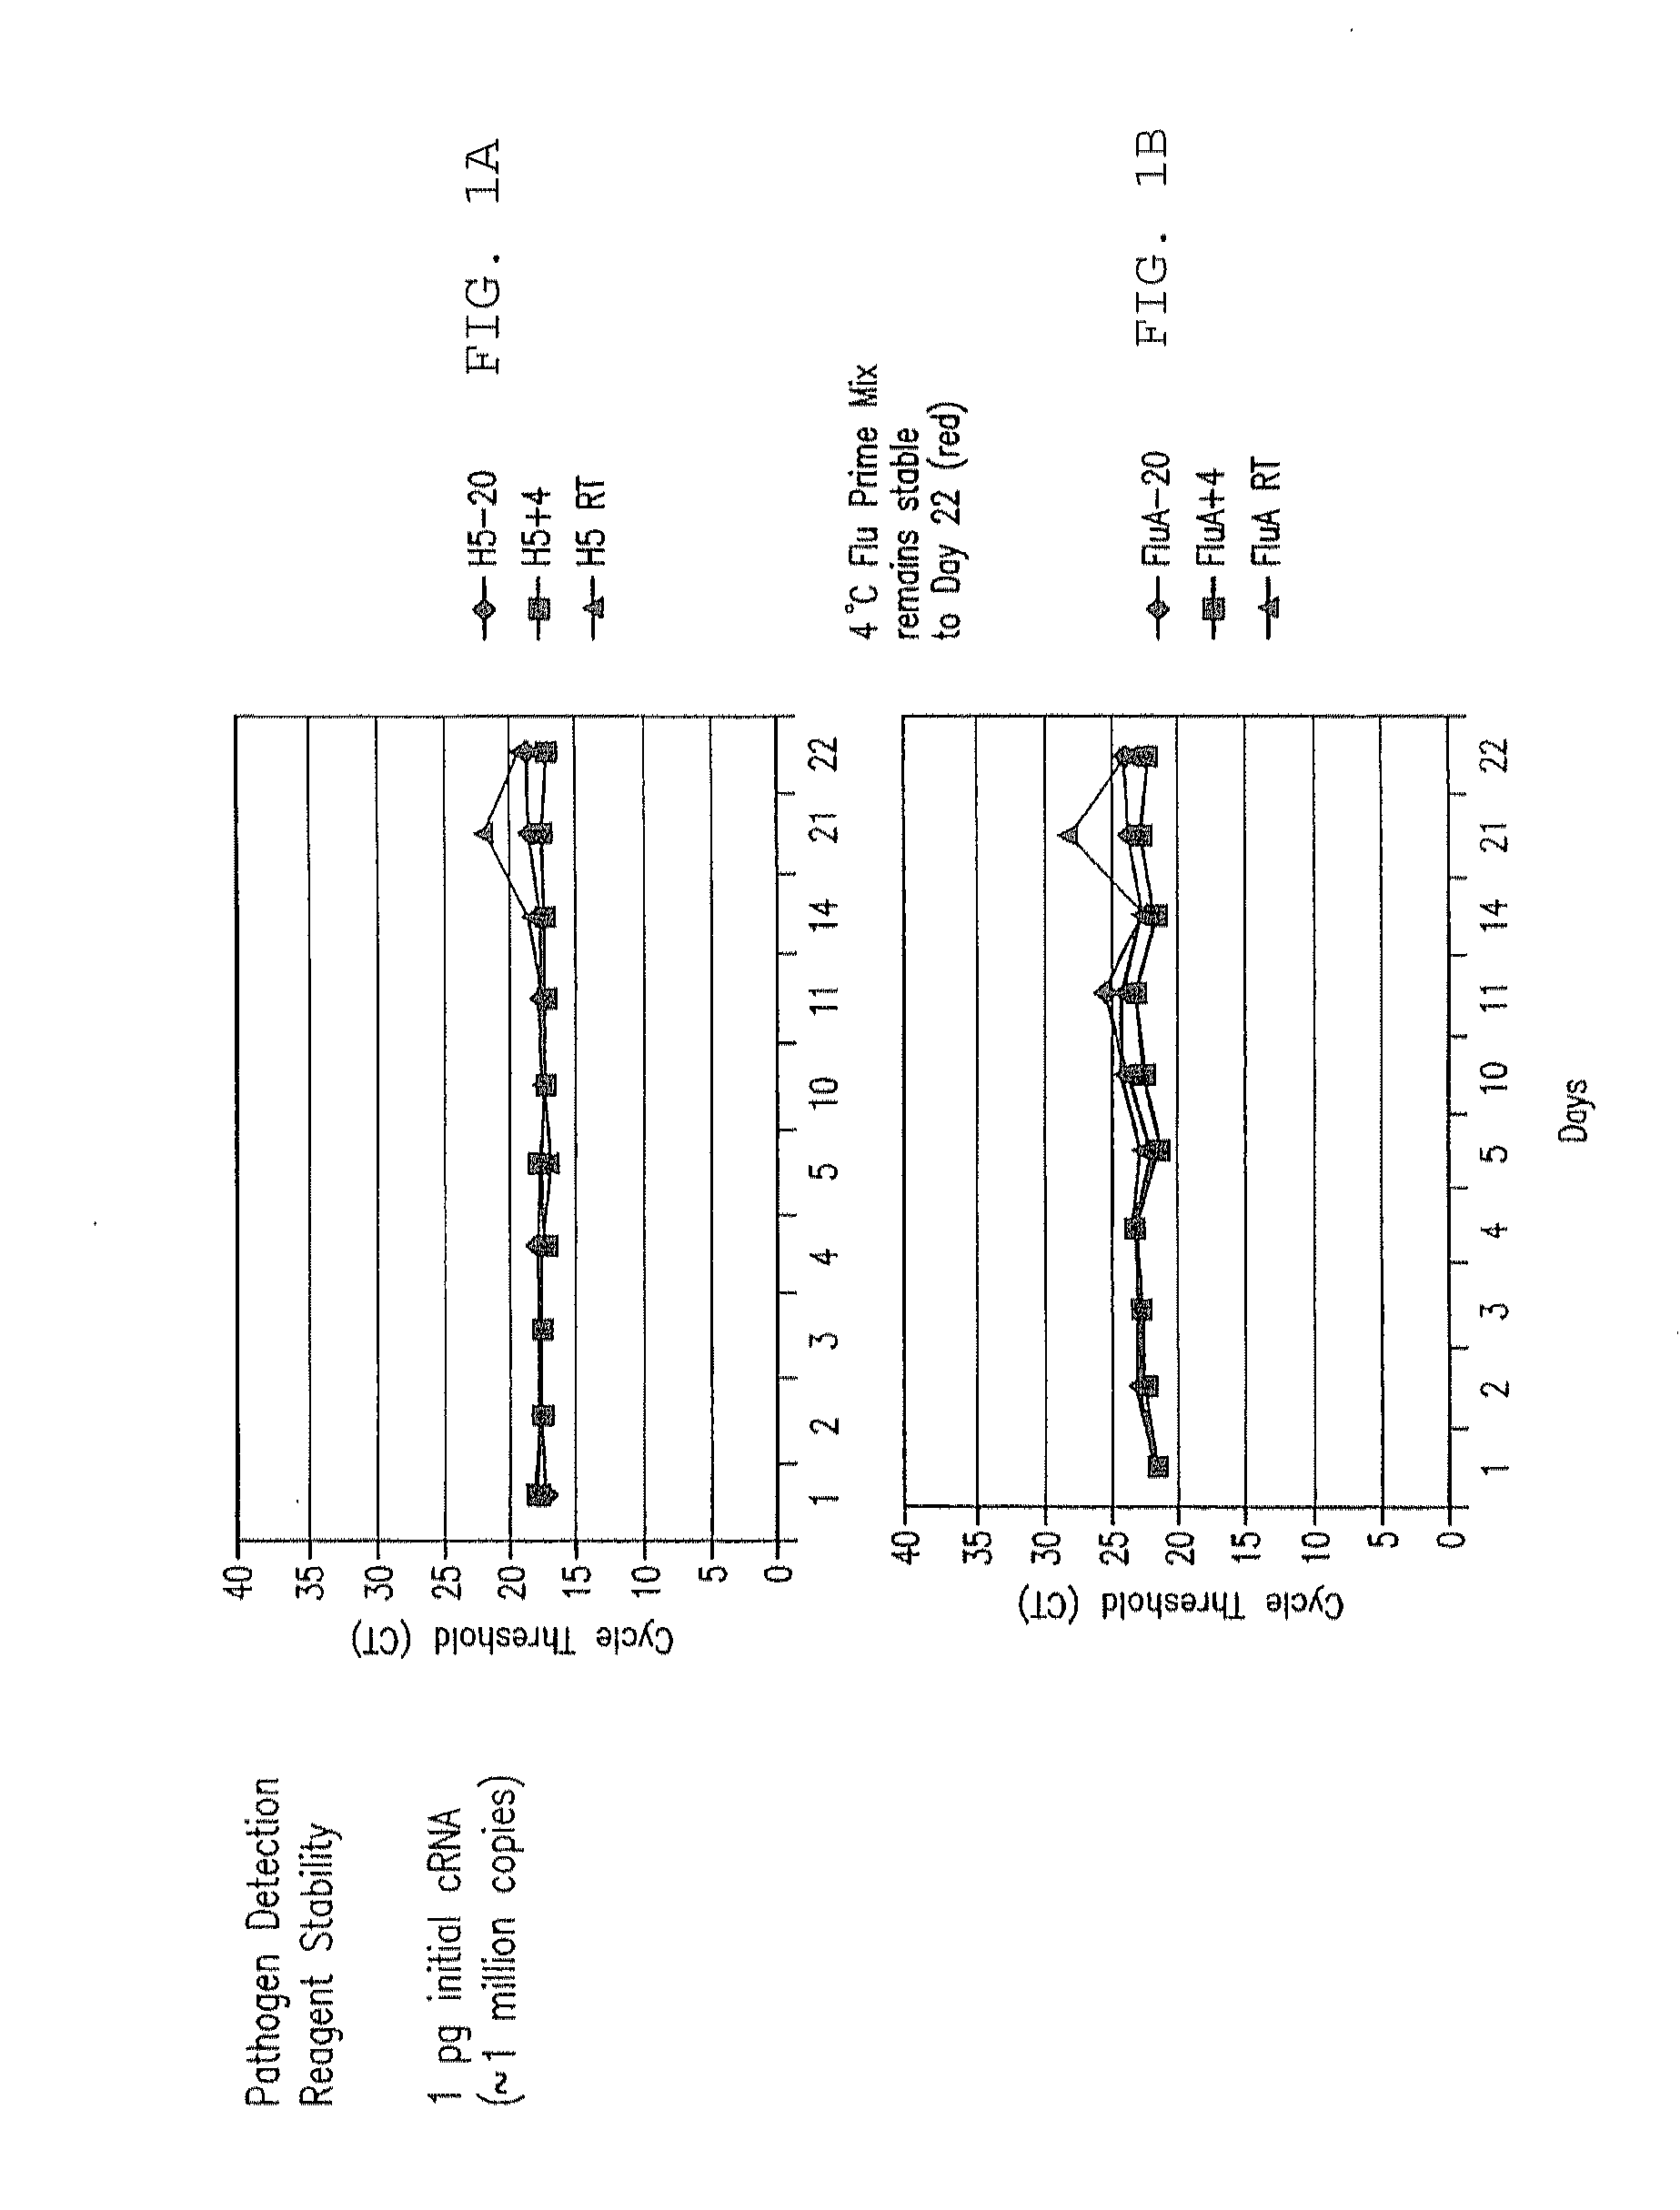 Compositions and Methods for Rapid, Real-Time Detection of Influenza A Virus (H1N1) Swine 2009